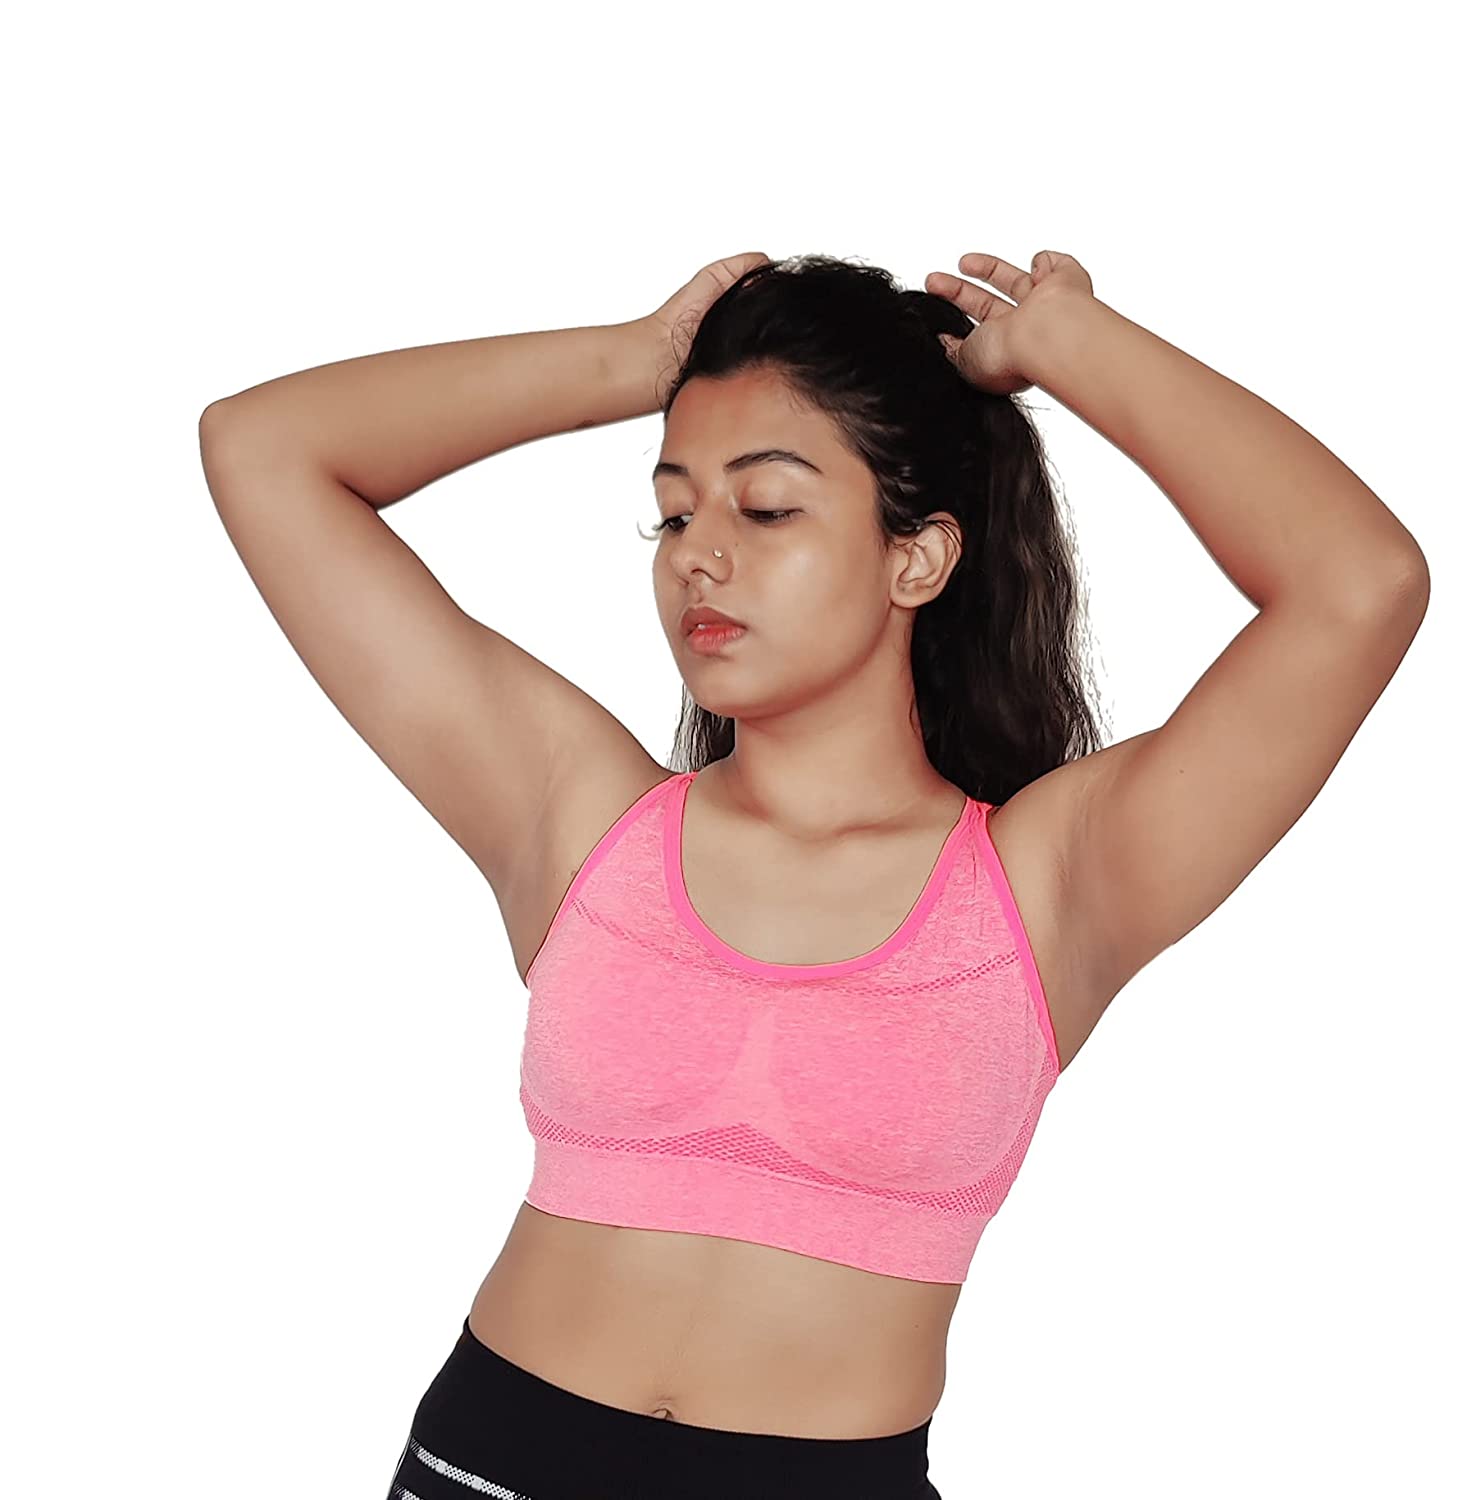 Women/Girl's Sports Bra. (Free Size Fits 28 to 34B) Removable Pads